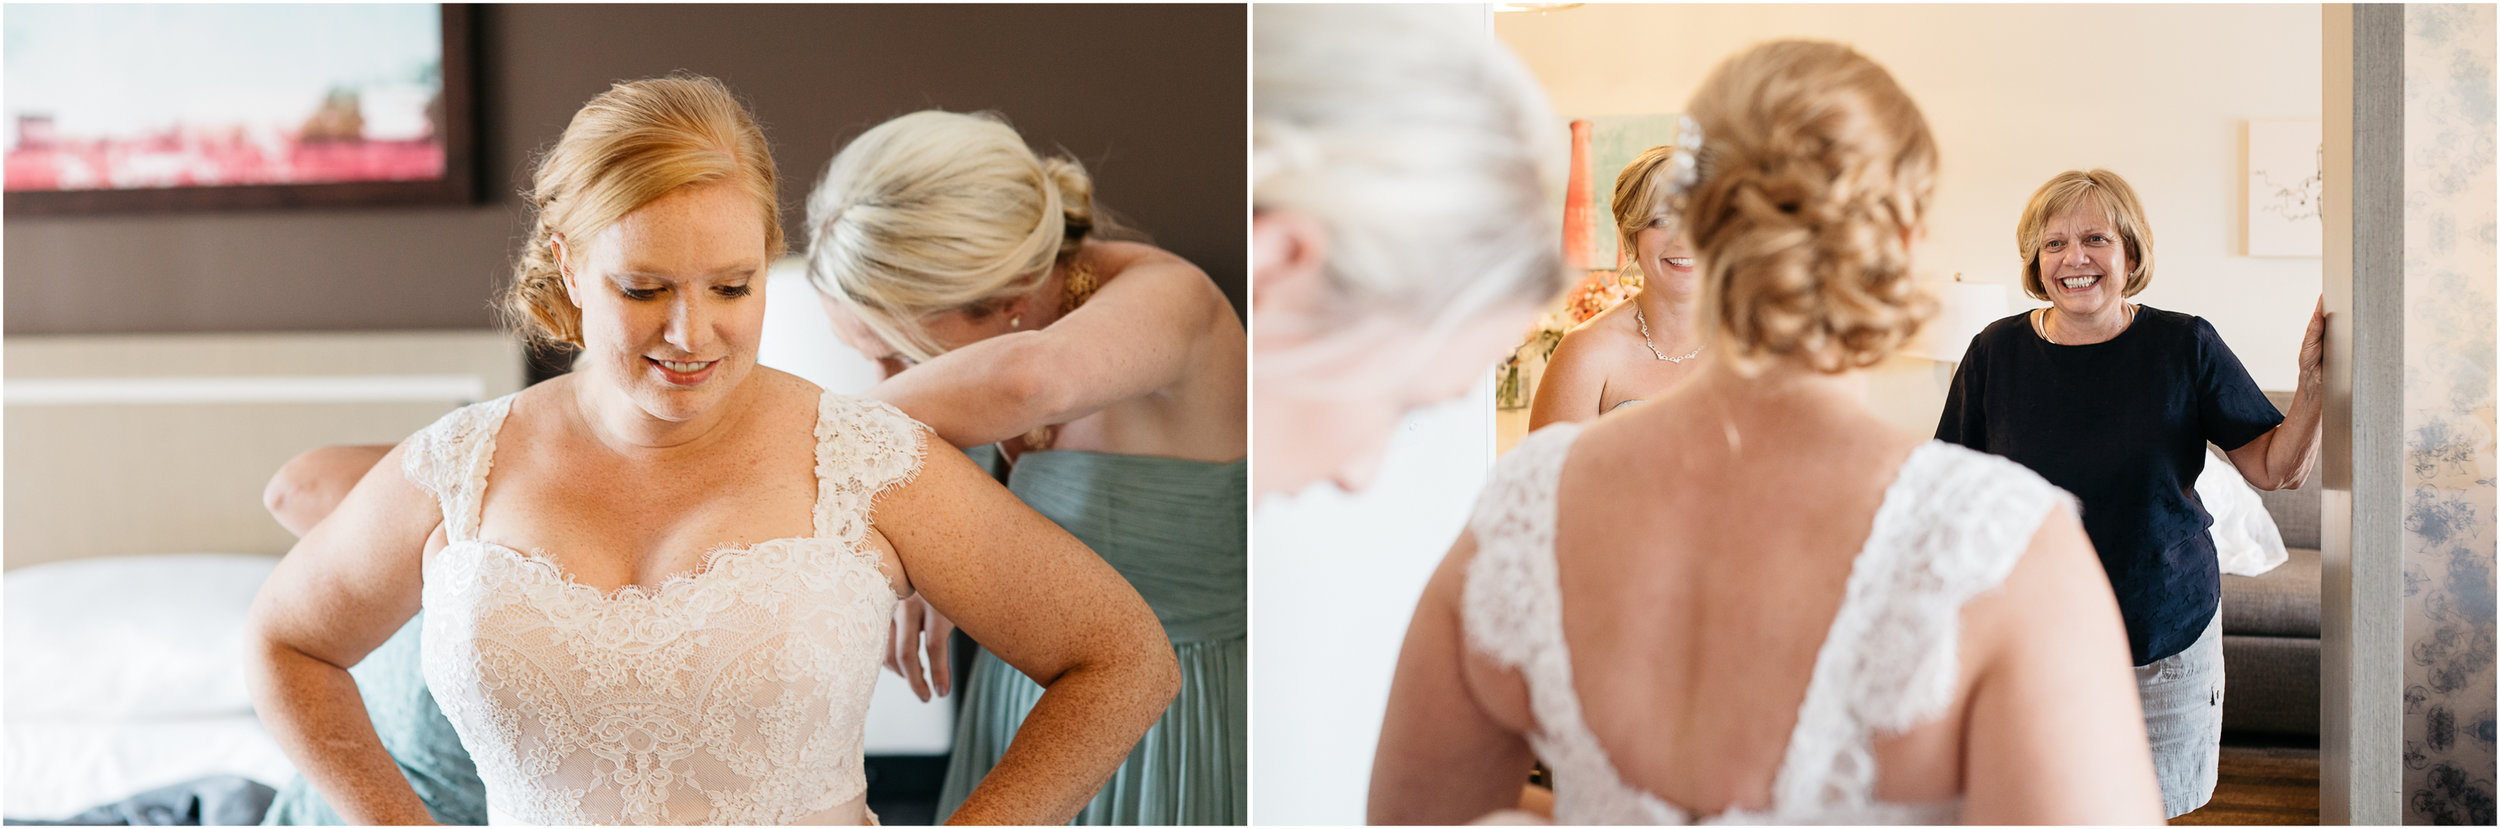 bride getting ready mariah fisher photography.jpg